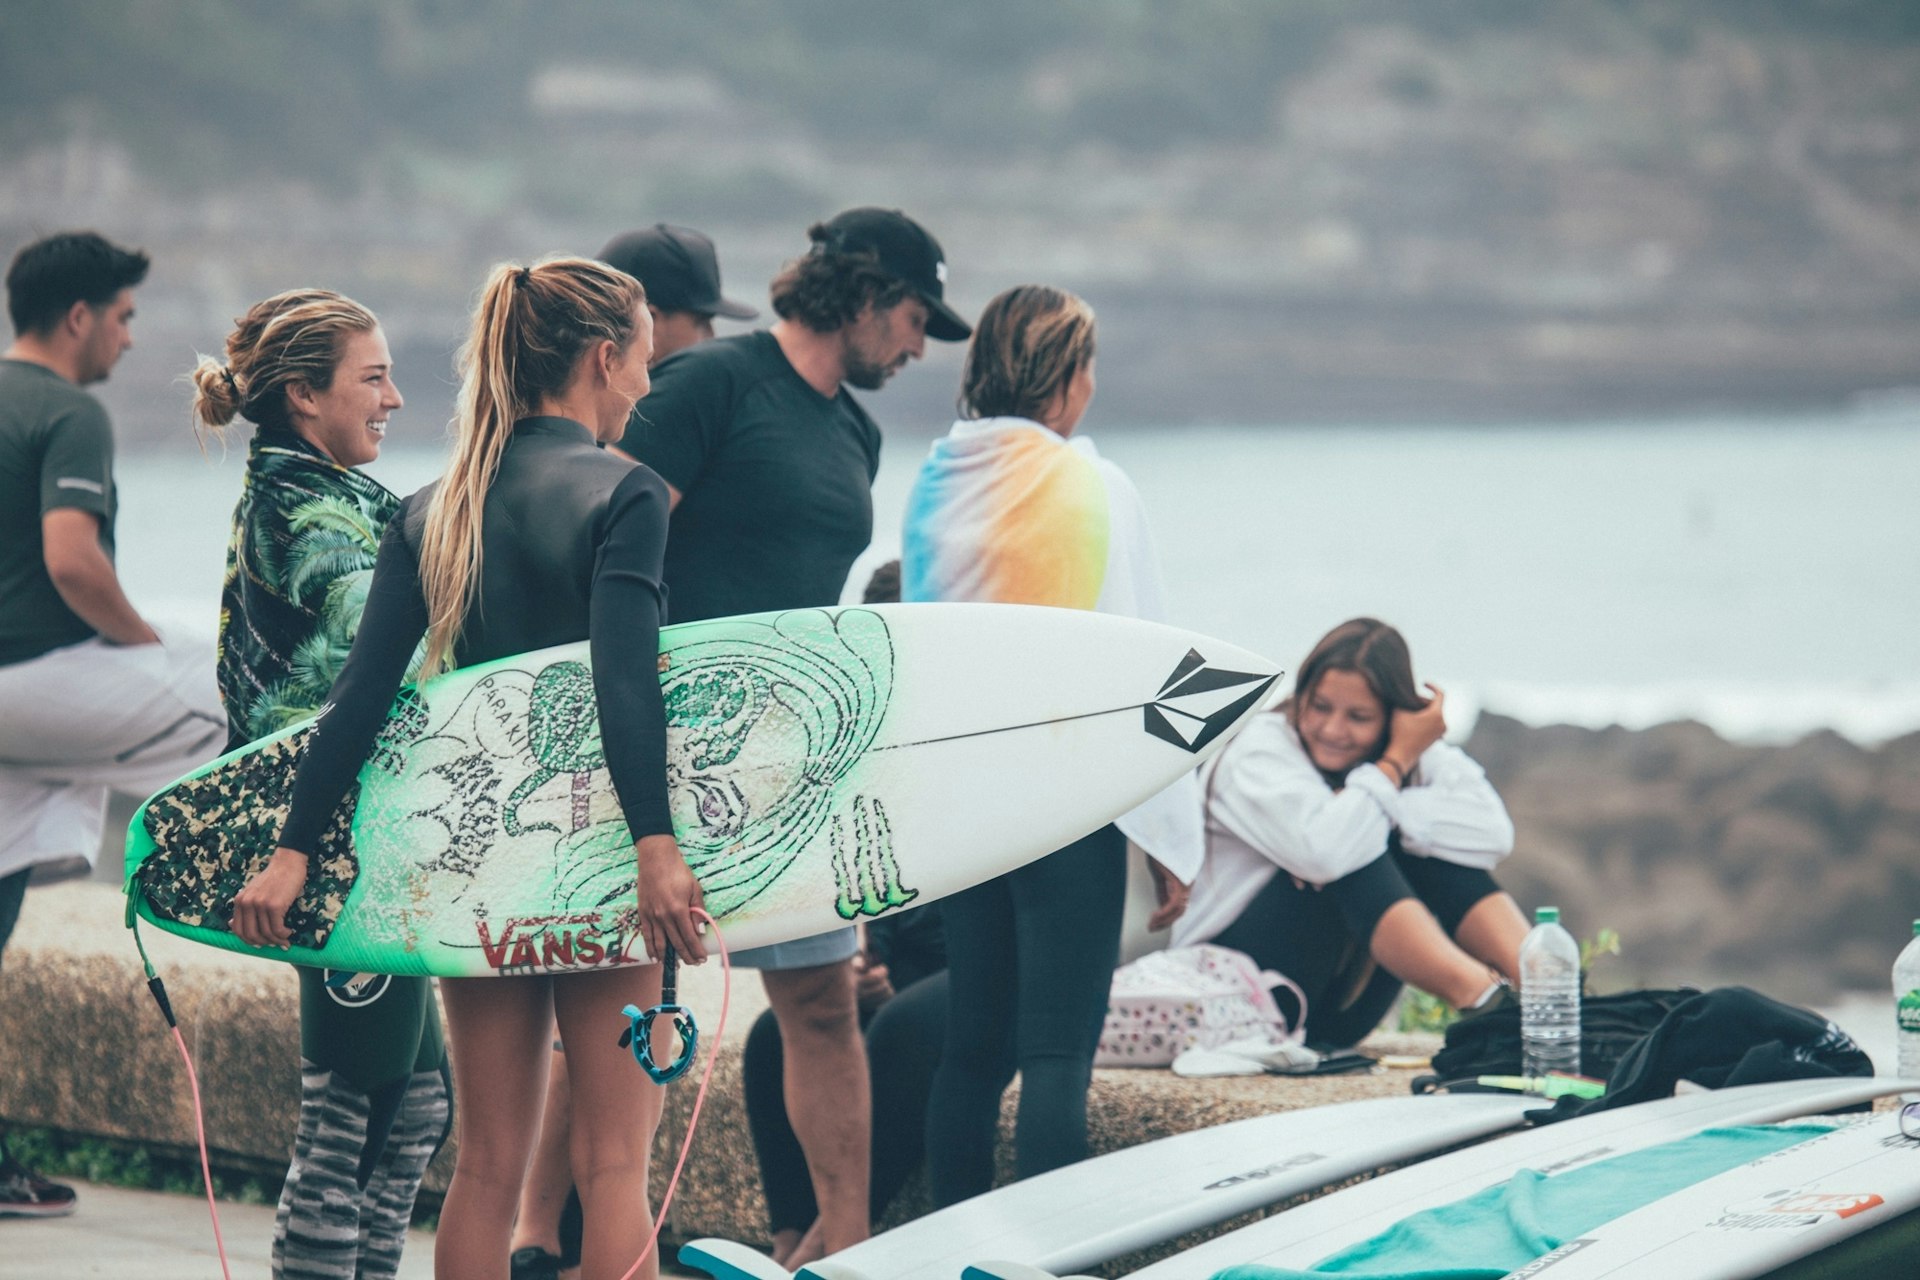 Pro-surfer Maud Le Car shares her guide to Basque France